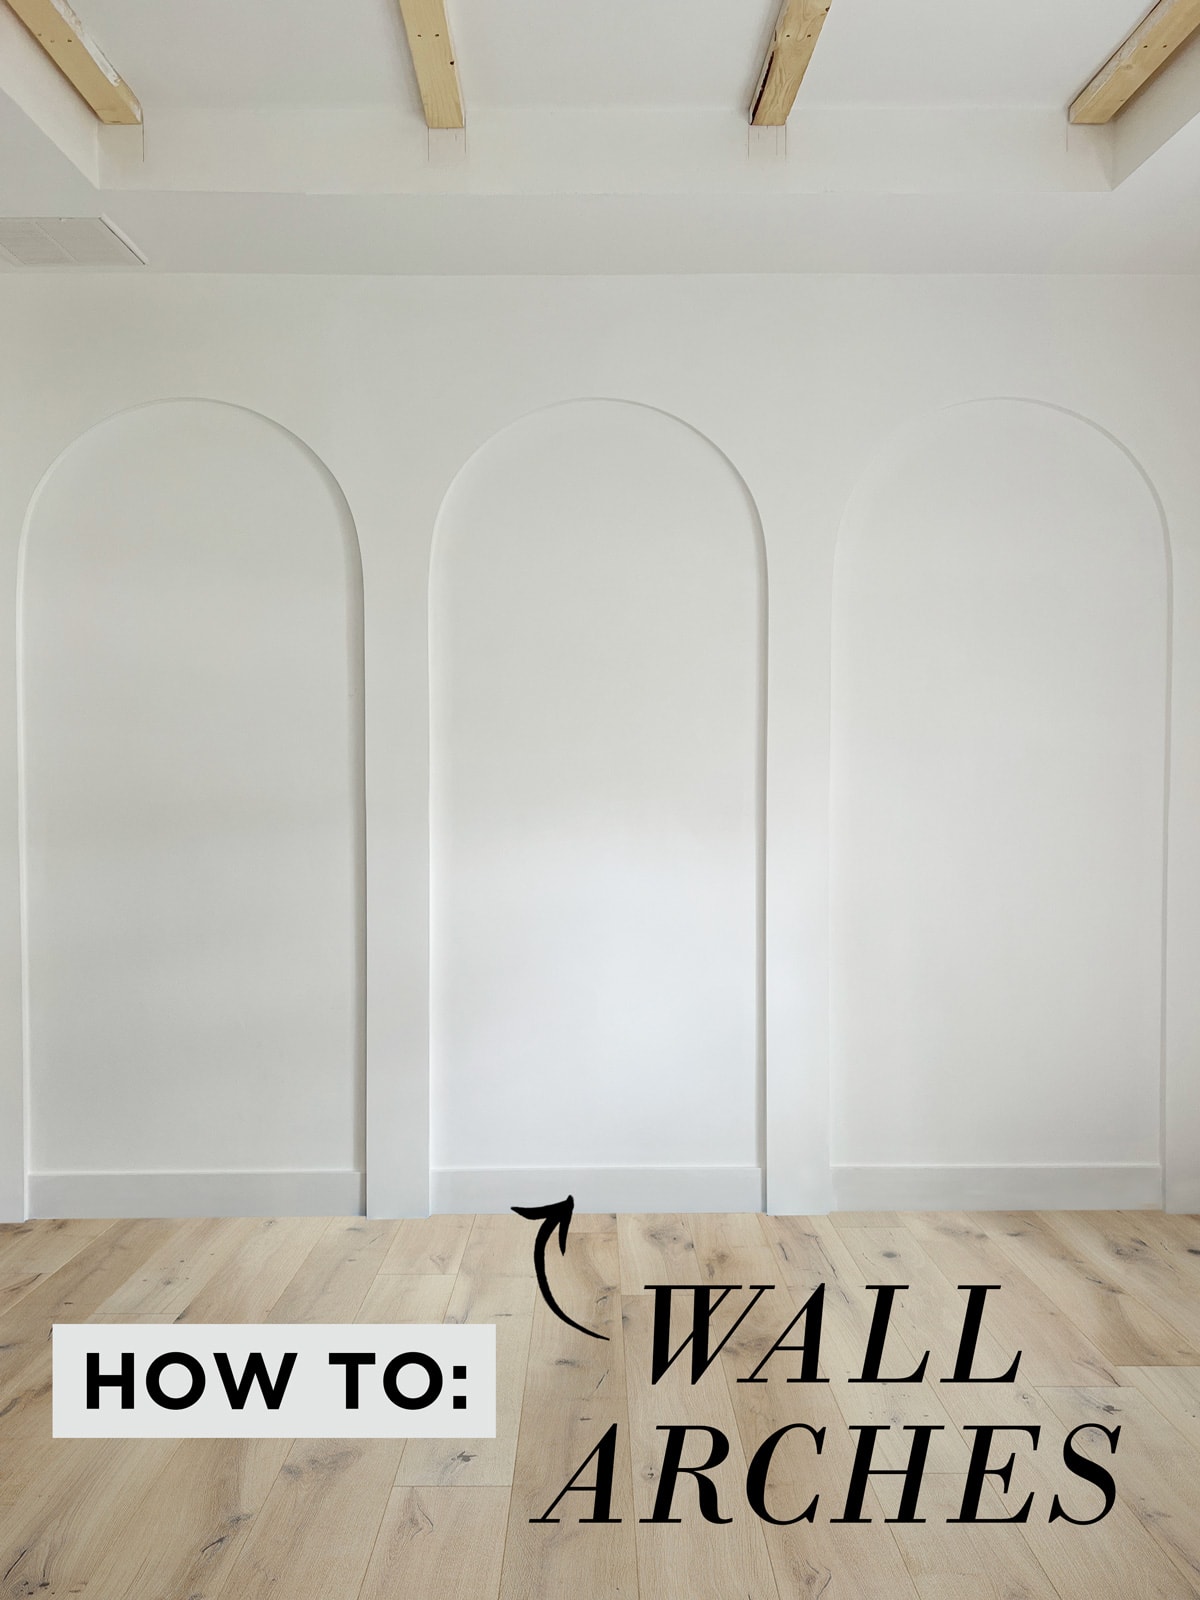 how to diy wall arches tutorial